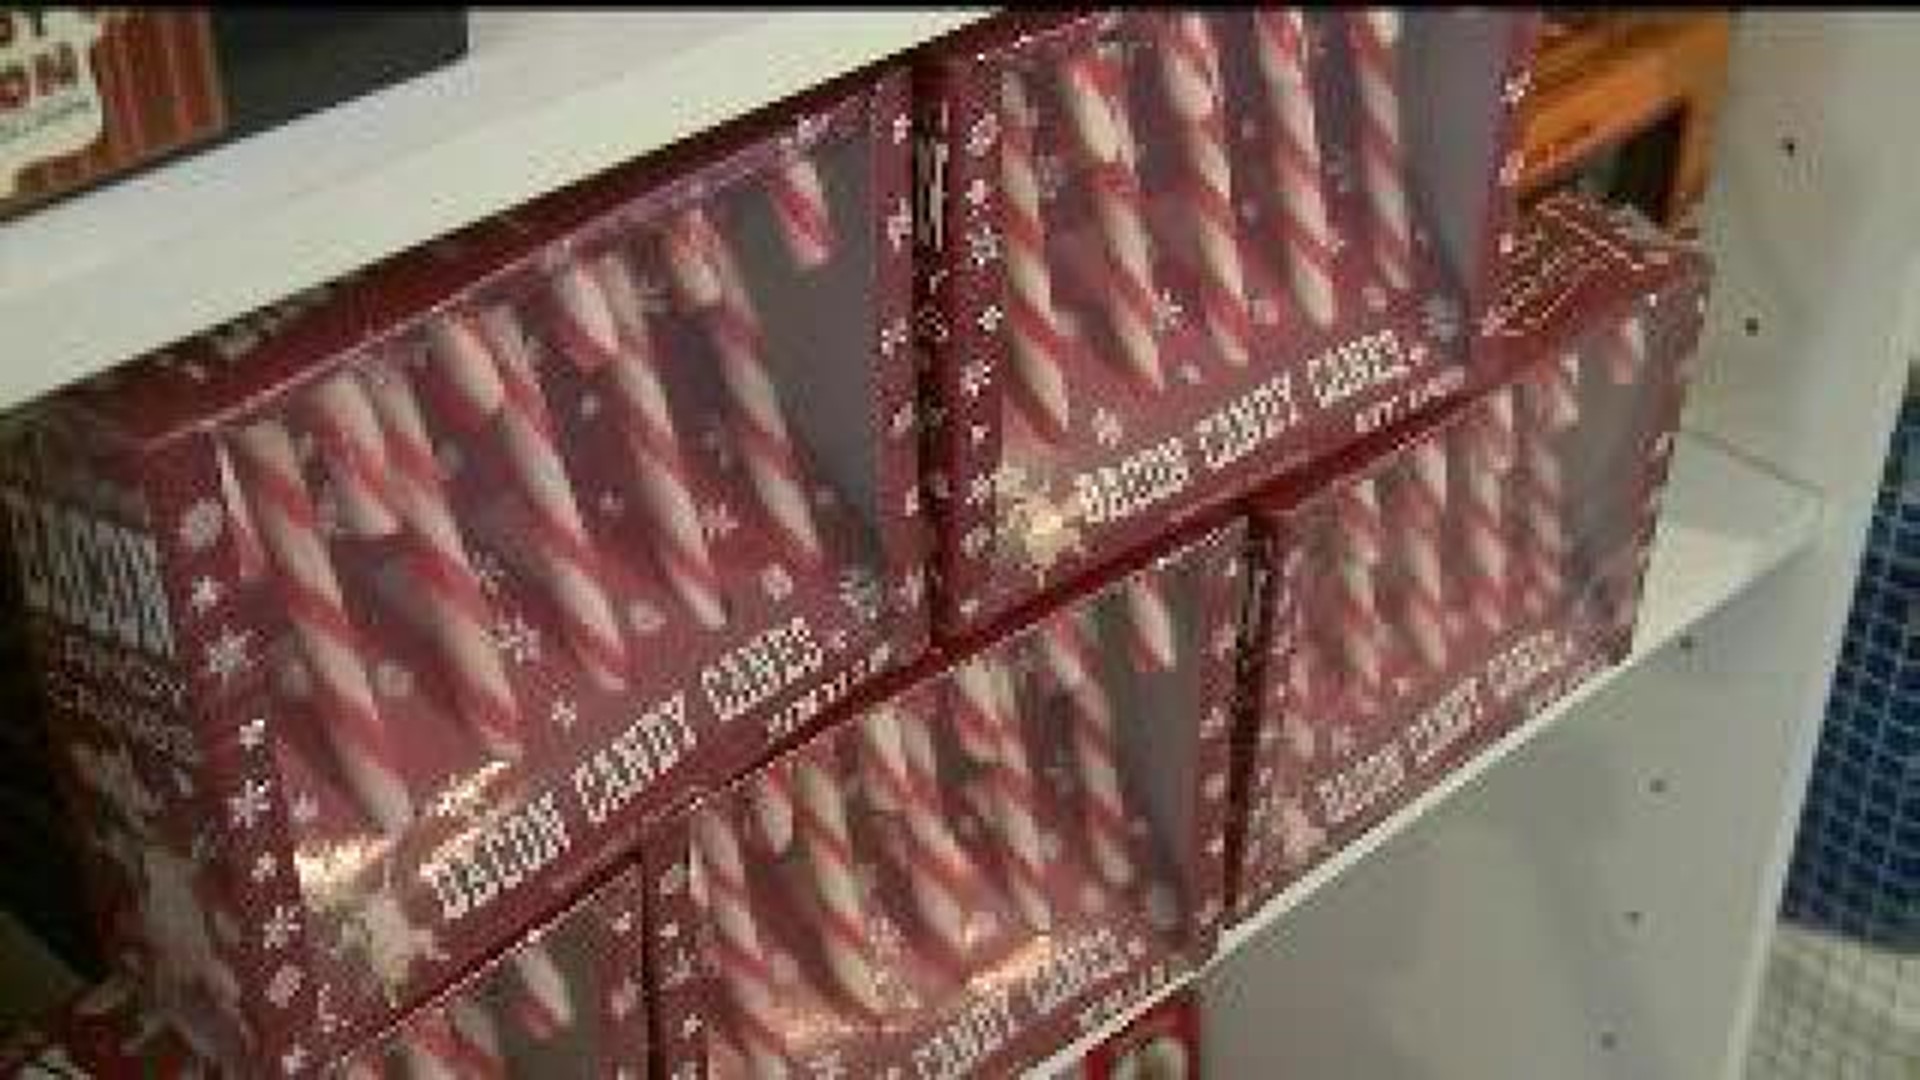 Bacon flavored candy canes